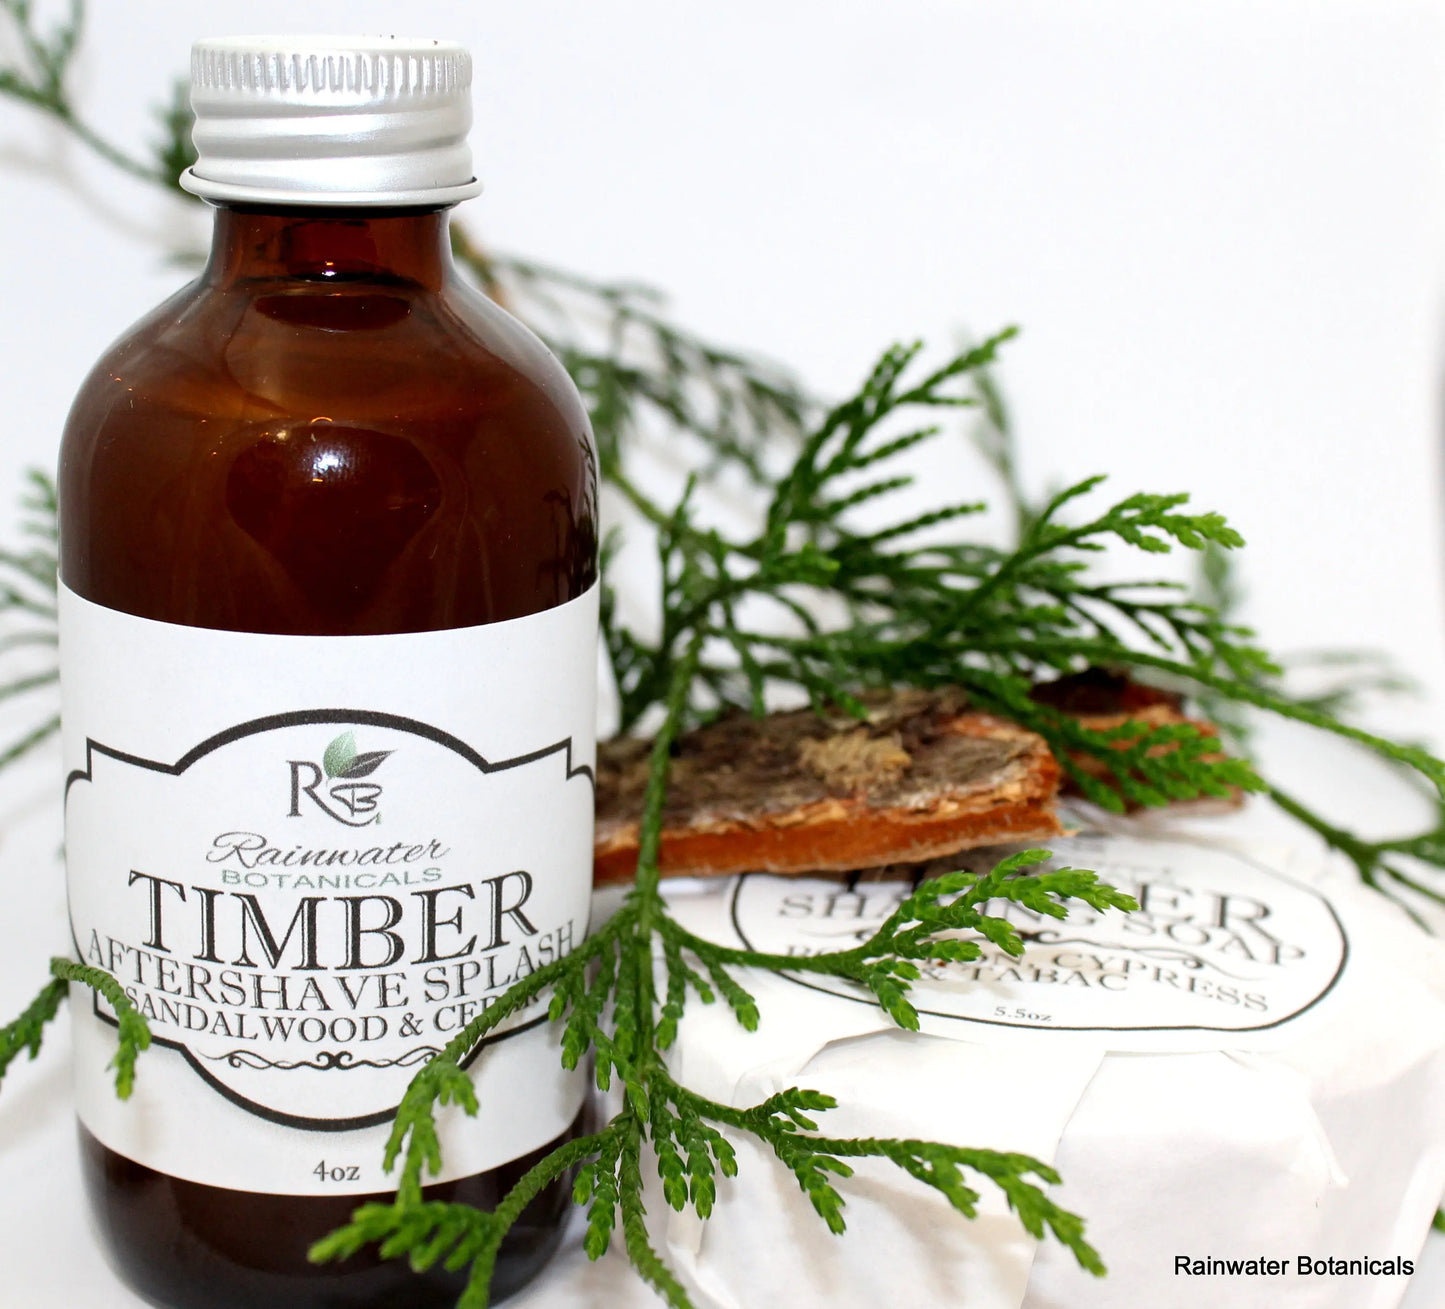 Timber Natural After Shave